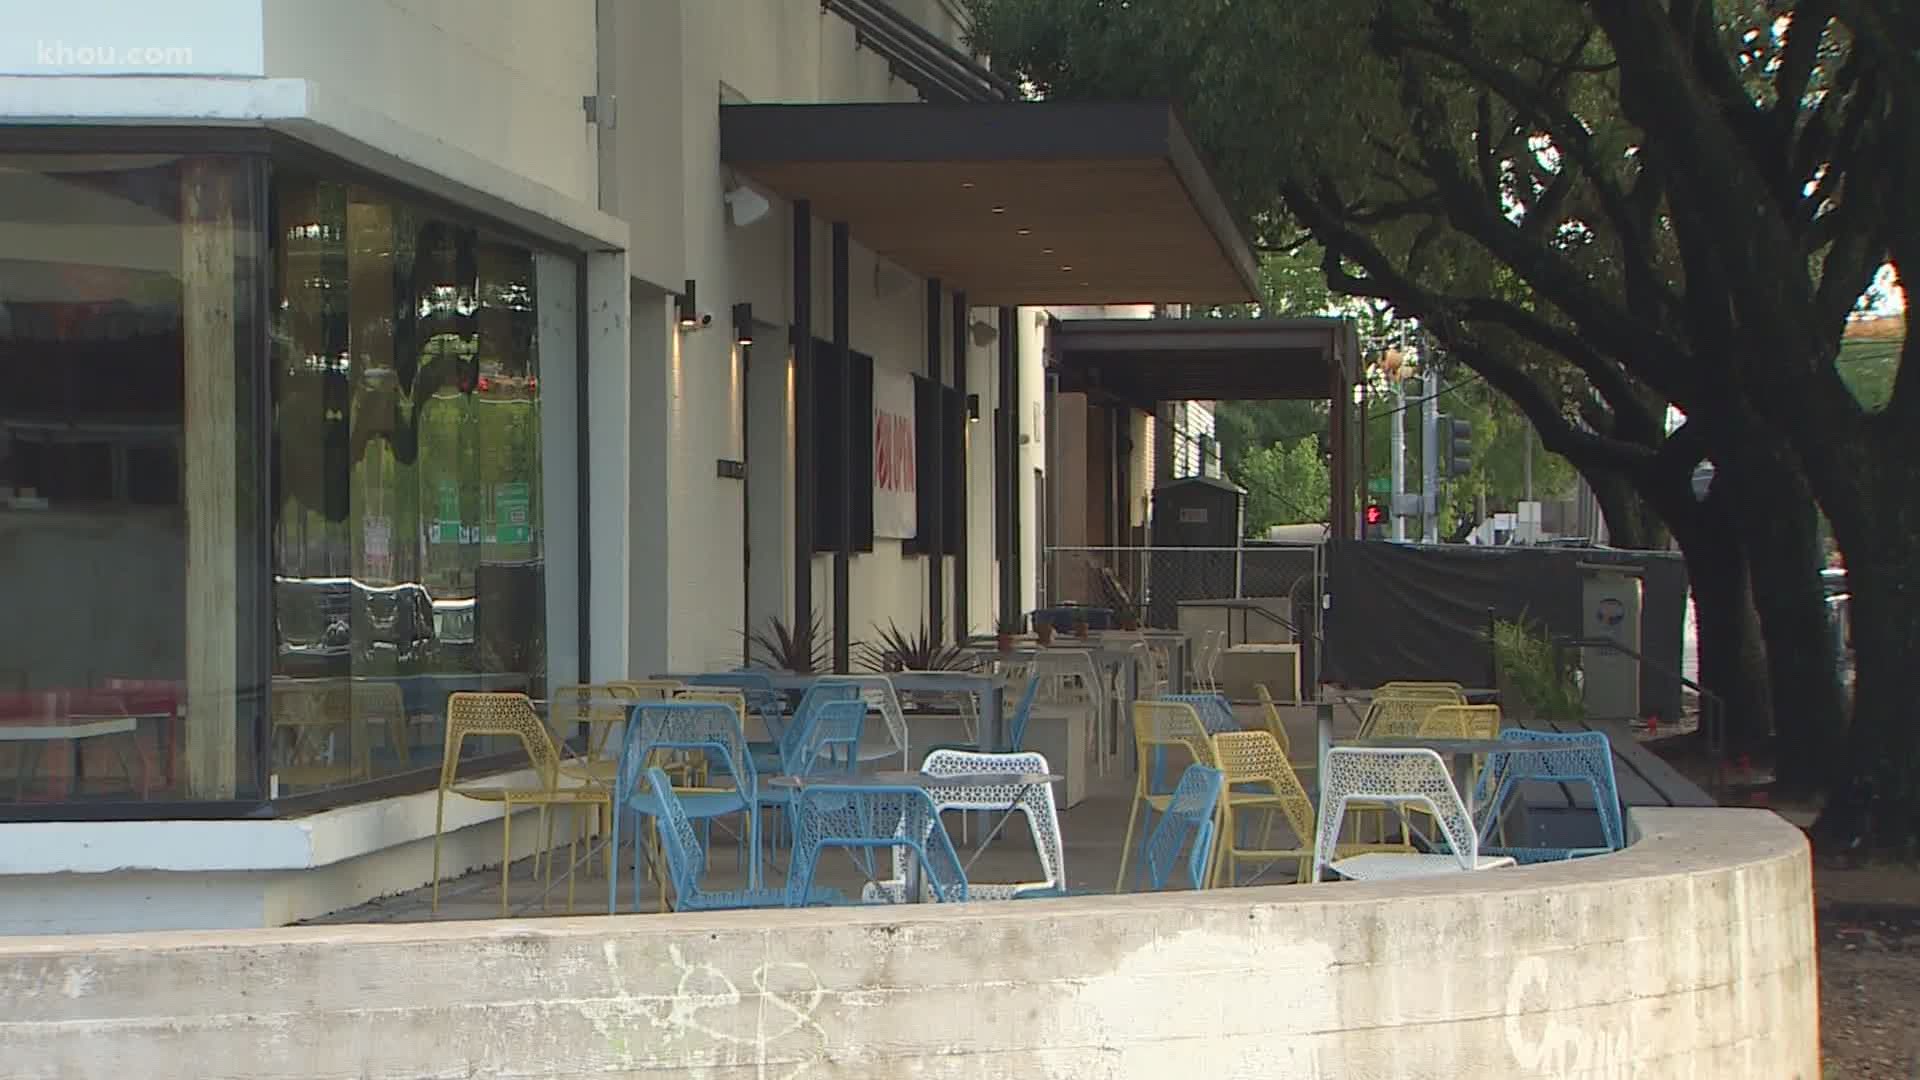 Restaurants and bars across Texas are looking for ways to stay afloat following Gov. Greg Abbott’s latest executive order.